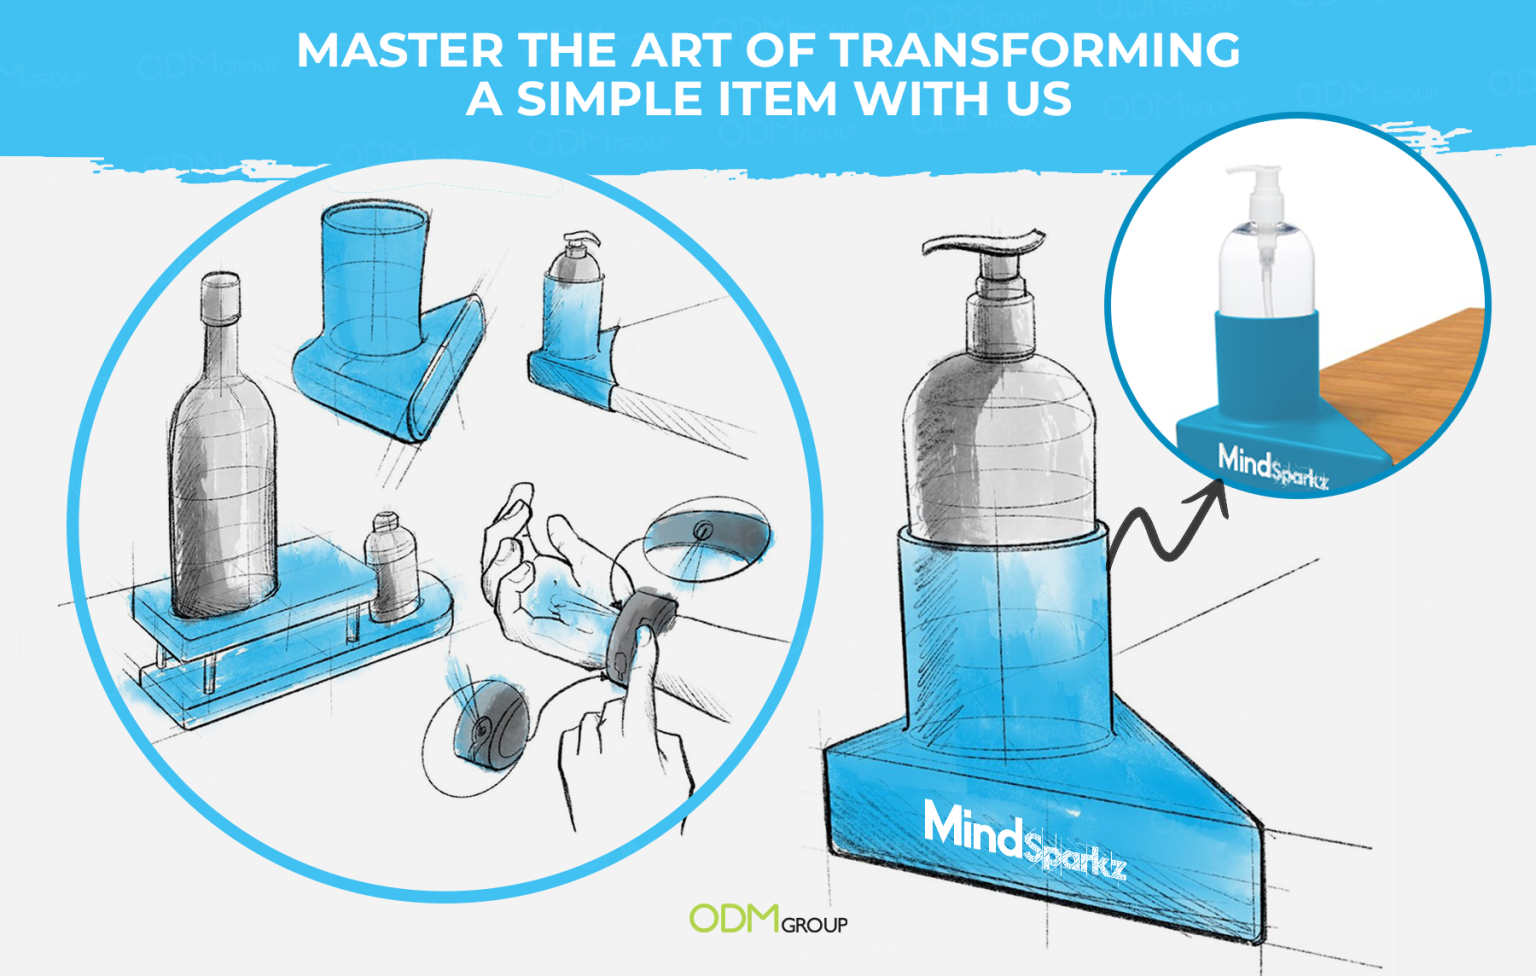 Illustrations of transforming a bottle into a hand sanitizer dispenser by ODM Group.